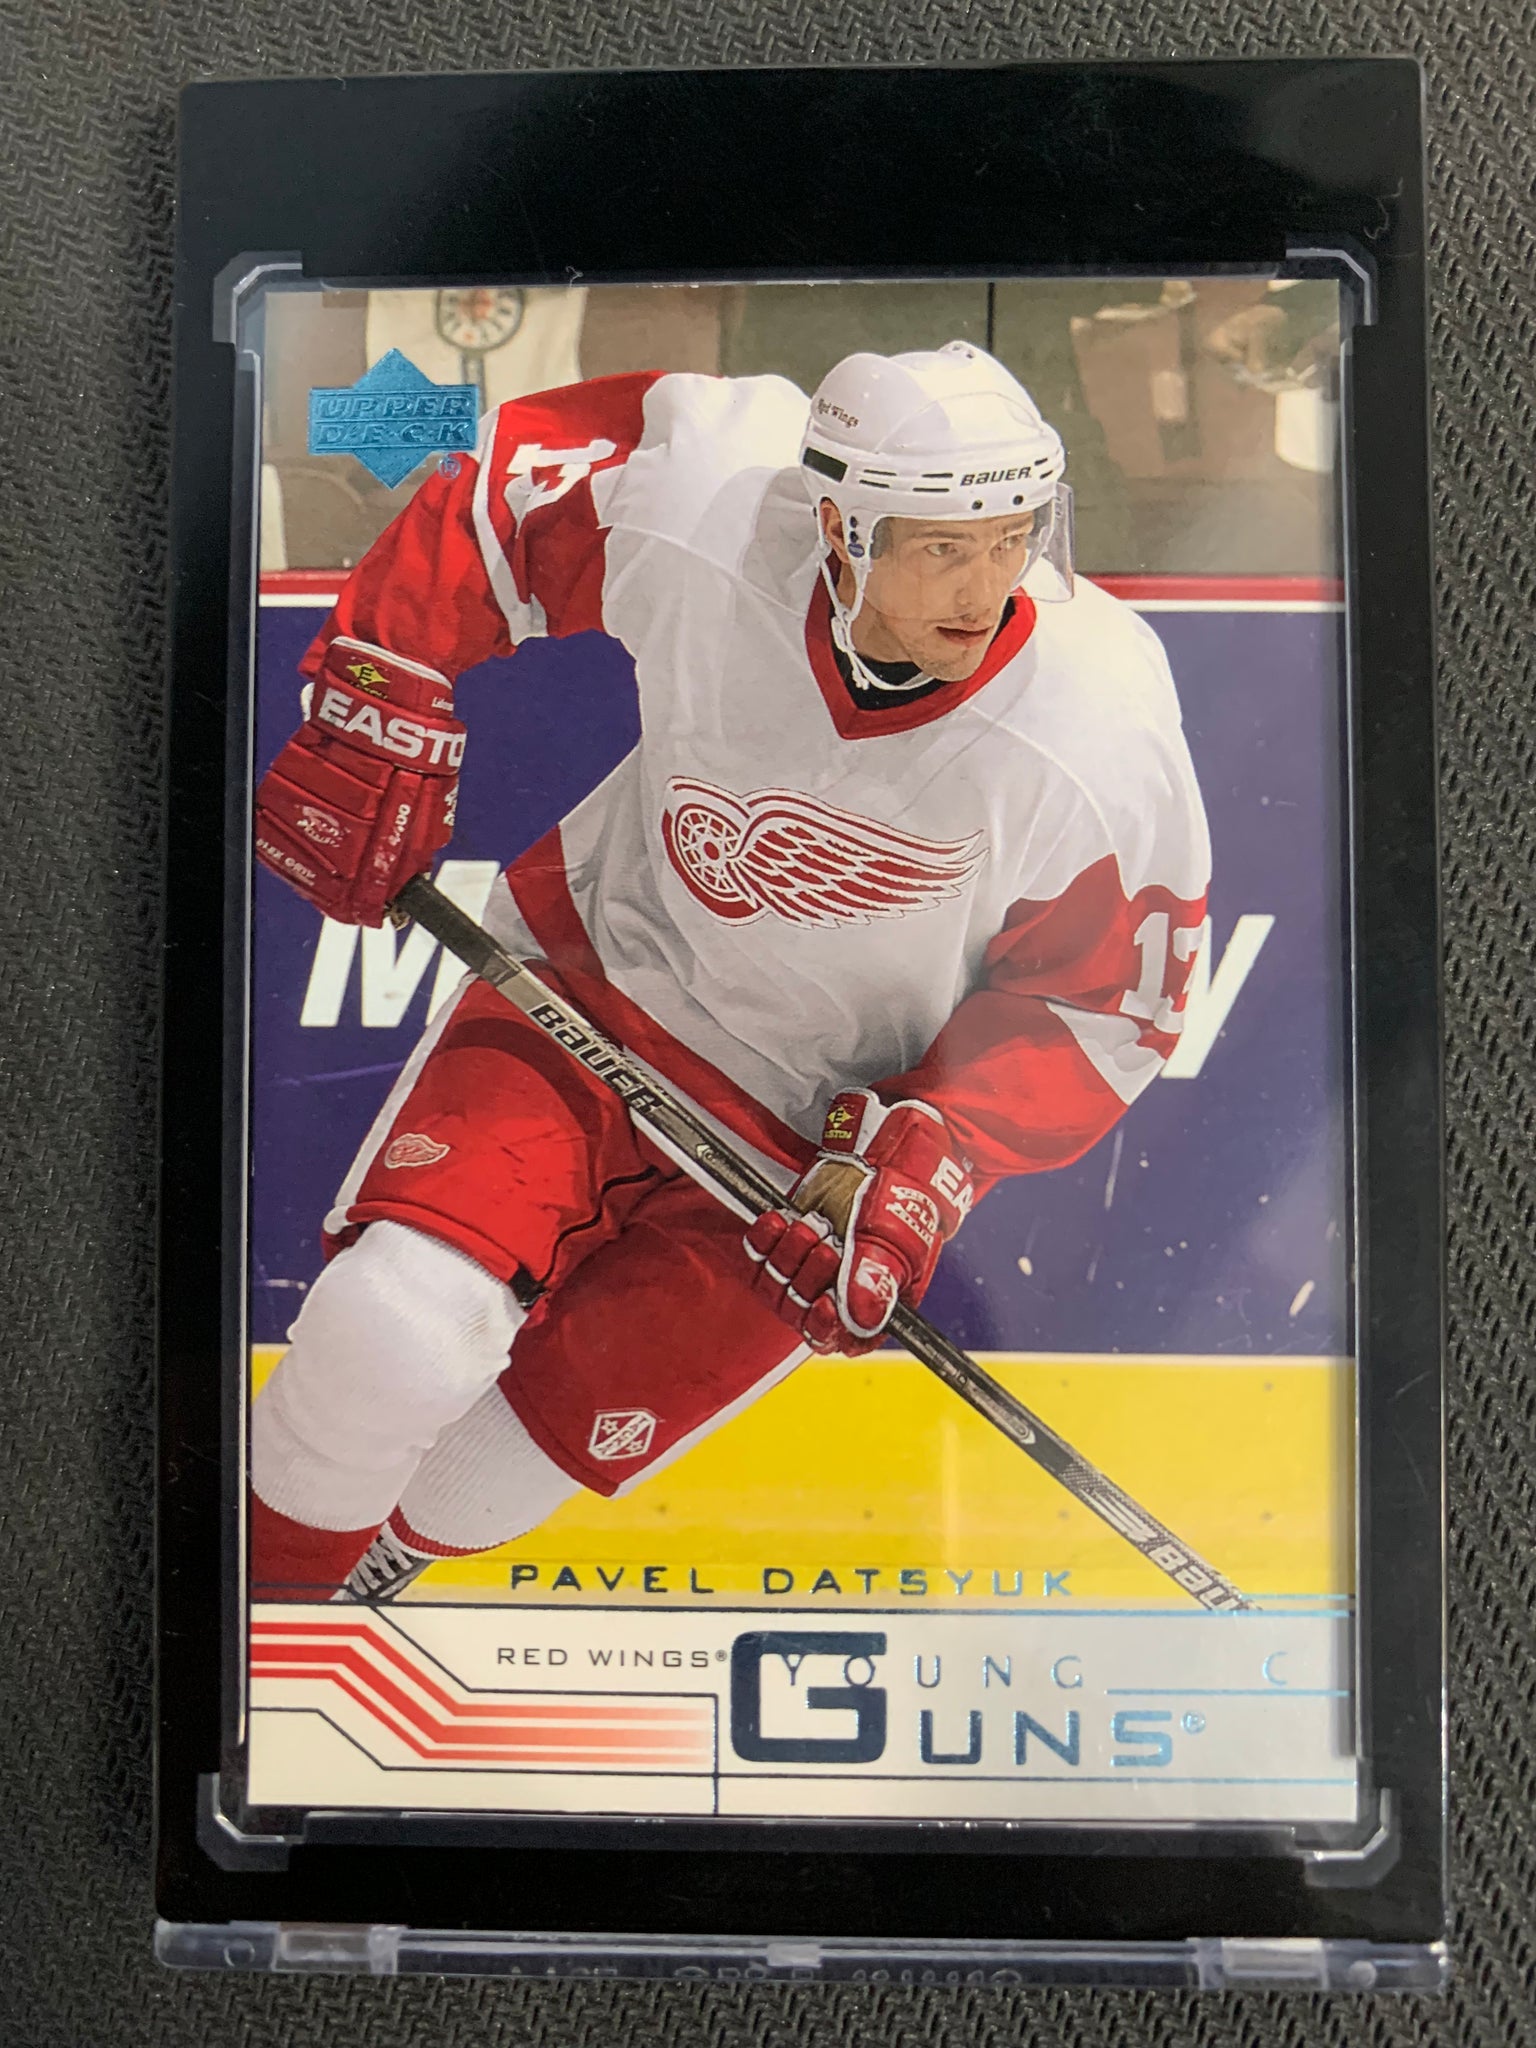 2002-03 UPPER DECK HOCKEY #422 DETROIT RED WINGS - PAVEL DATSYUK YOUNG GUNS ROOKIE CARD - MINT!